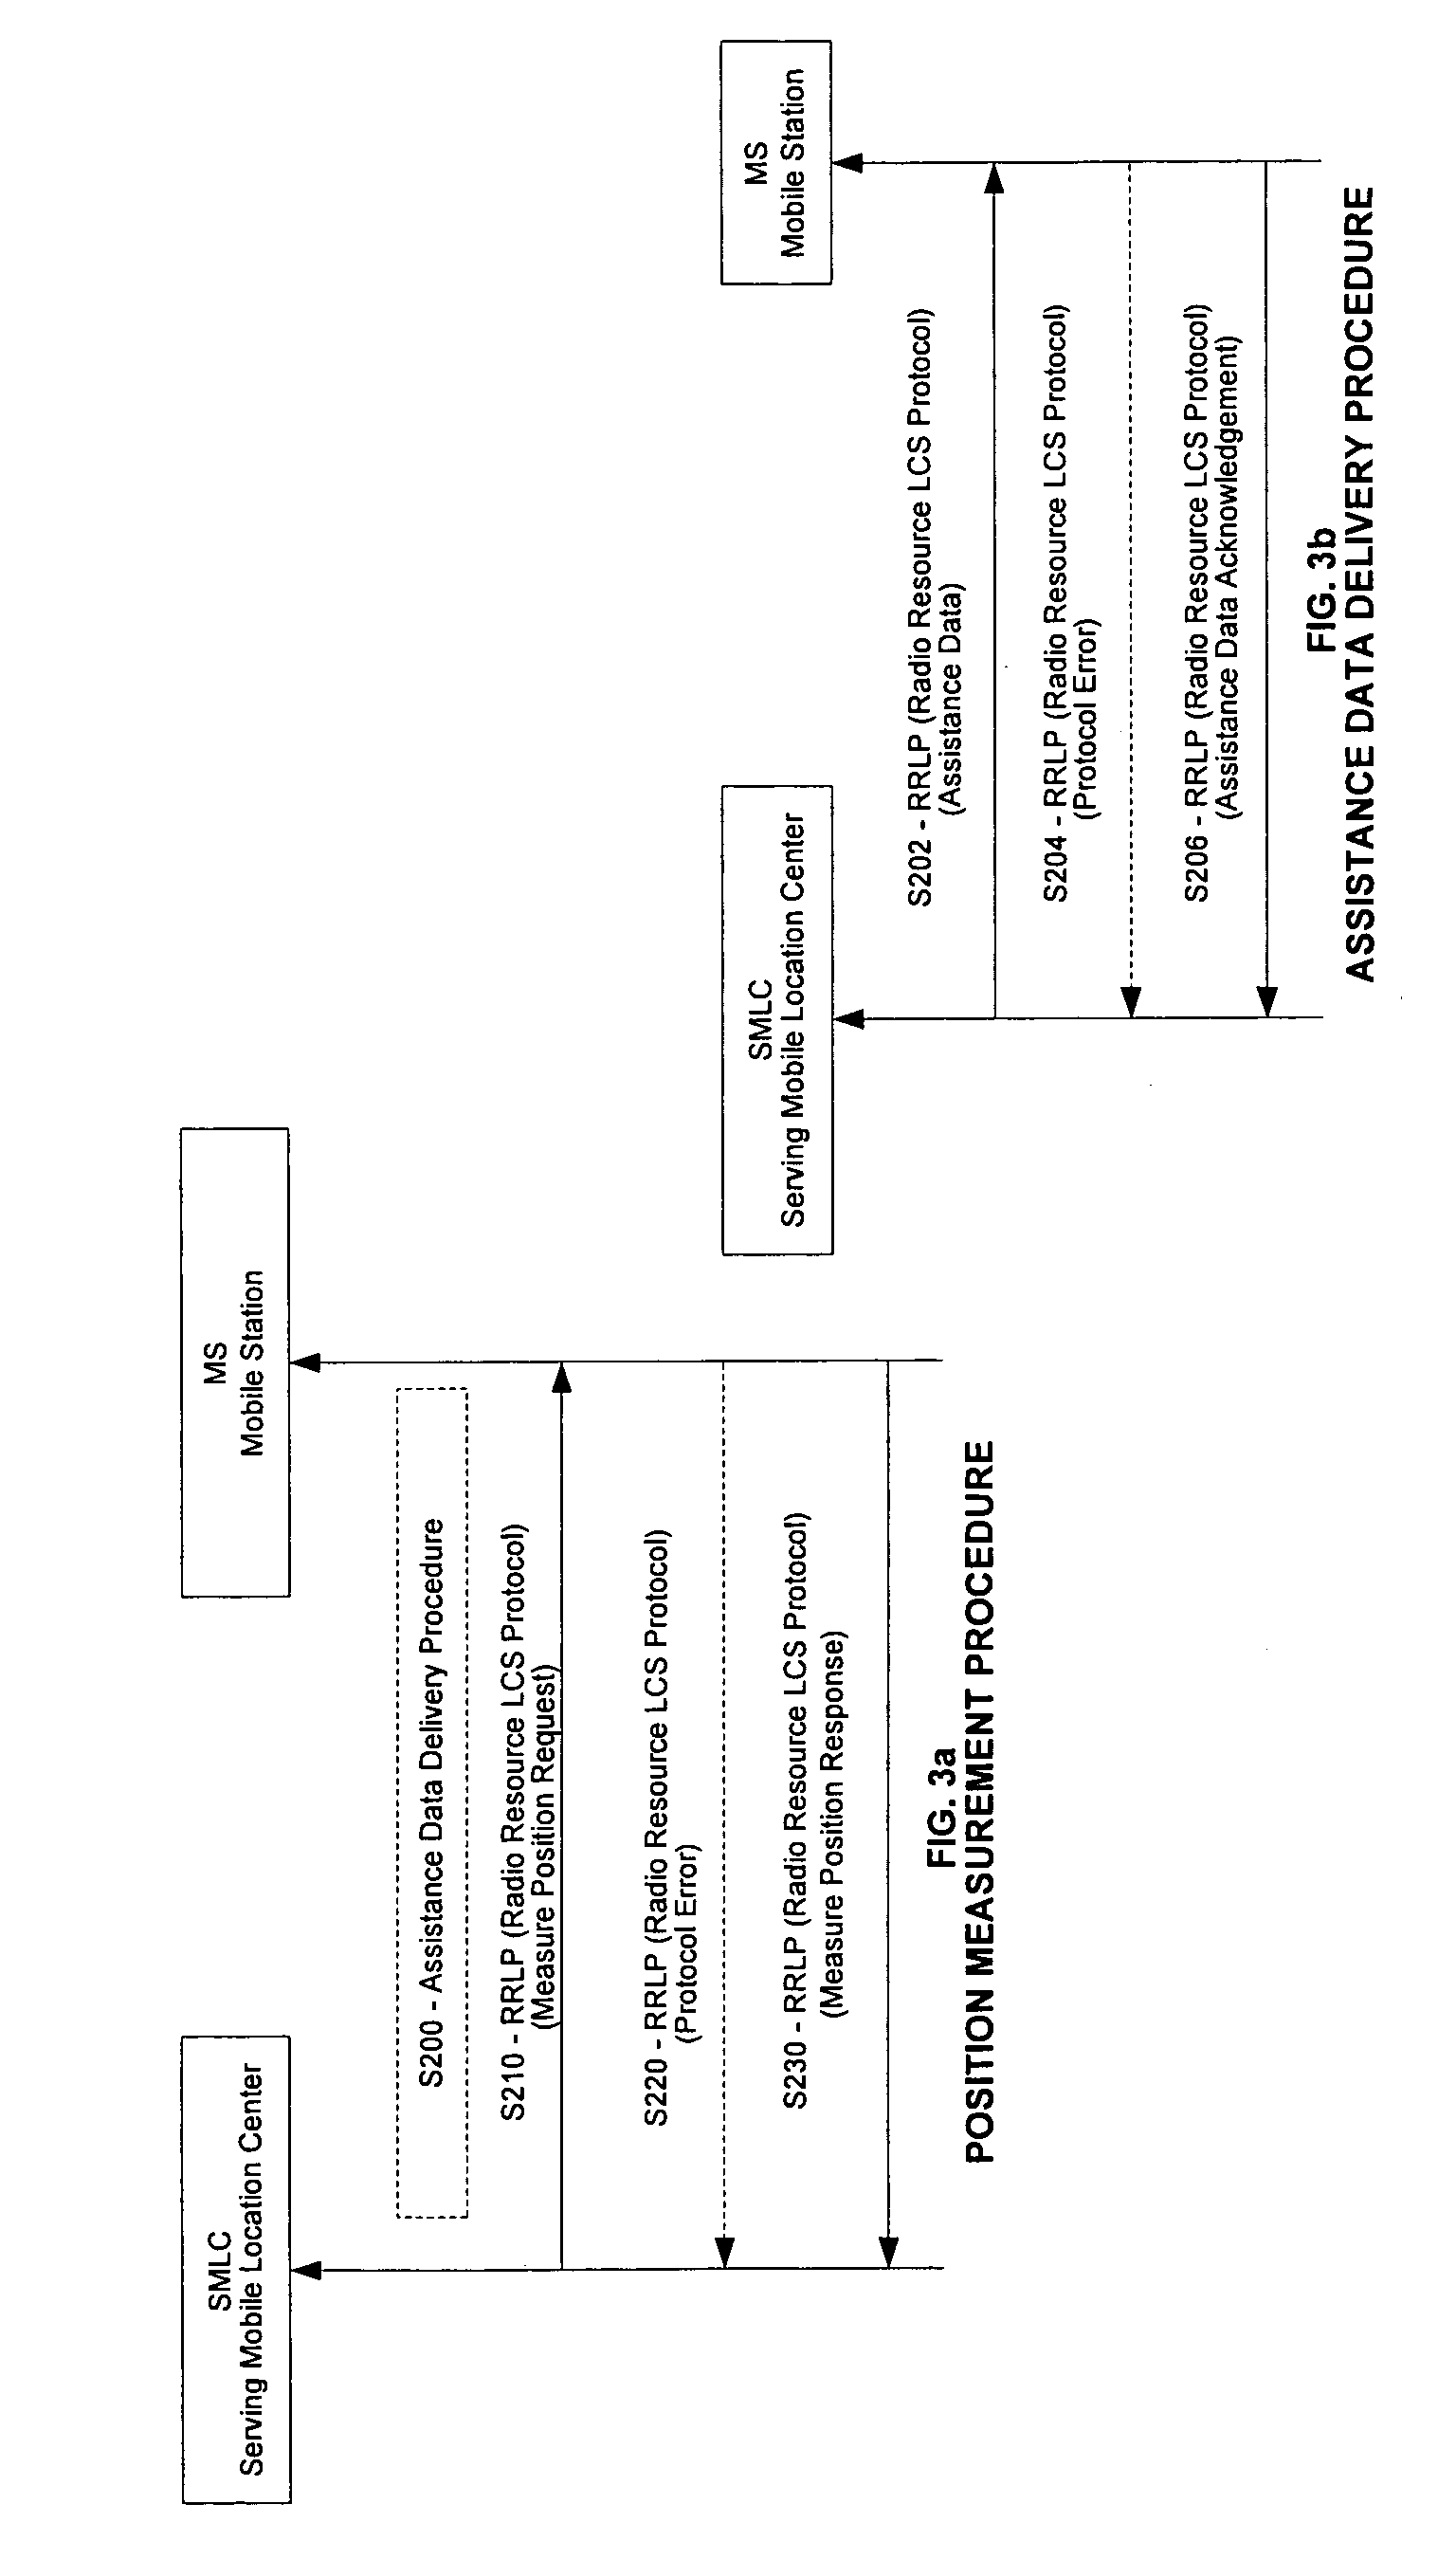 Method of compressing GPS assistance data to reduce the time for calculating a location of a mobile device